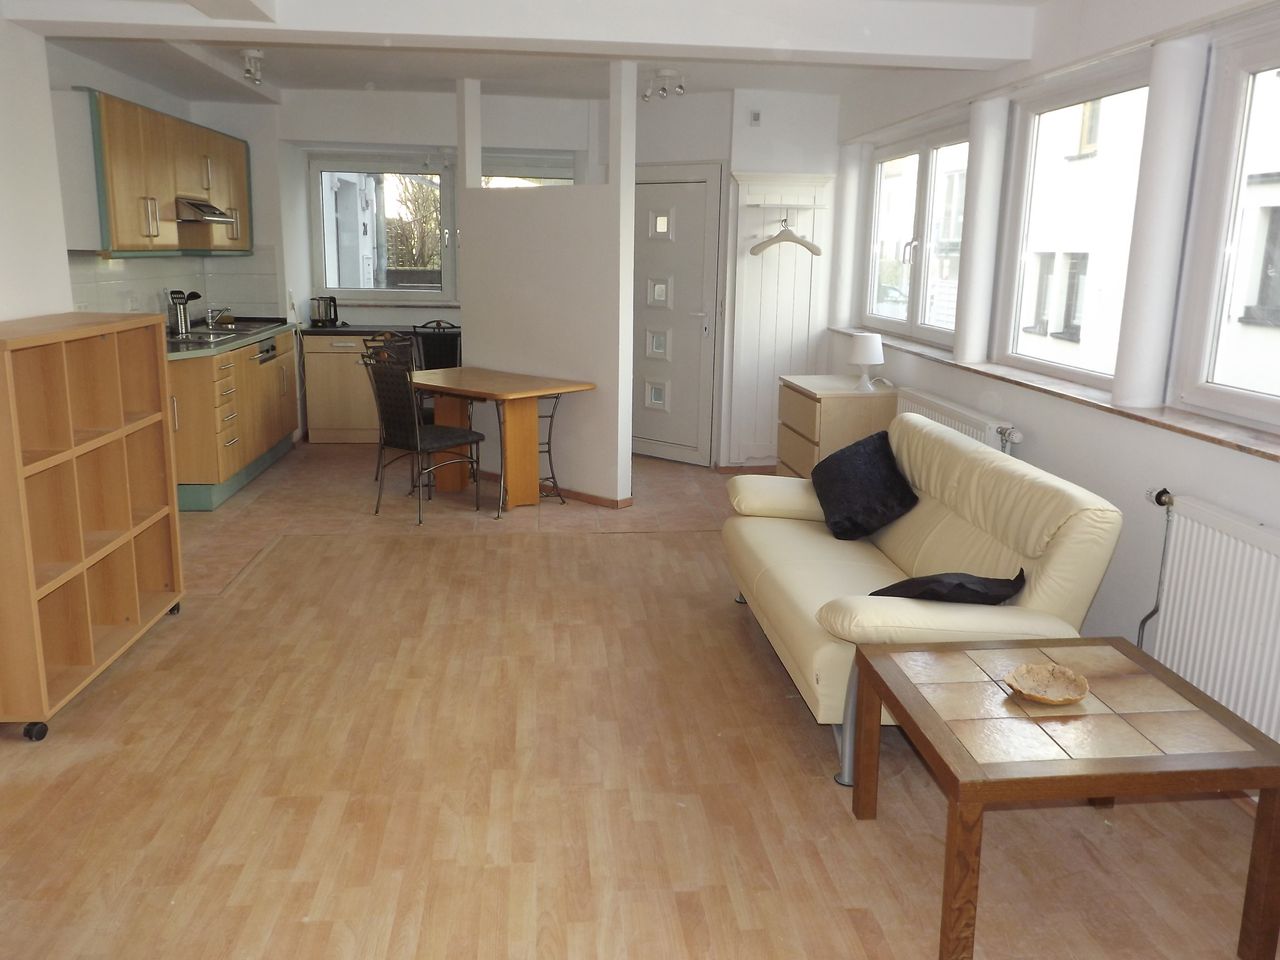 Fully furnished 1 bed room apartment in S-Wangen